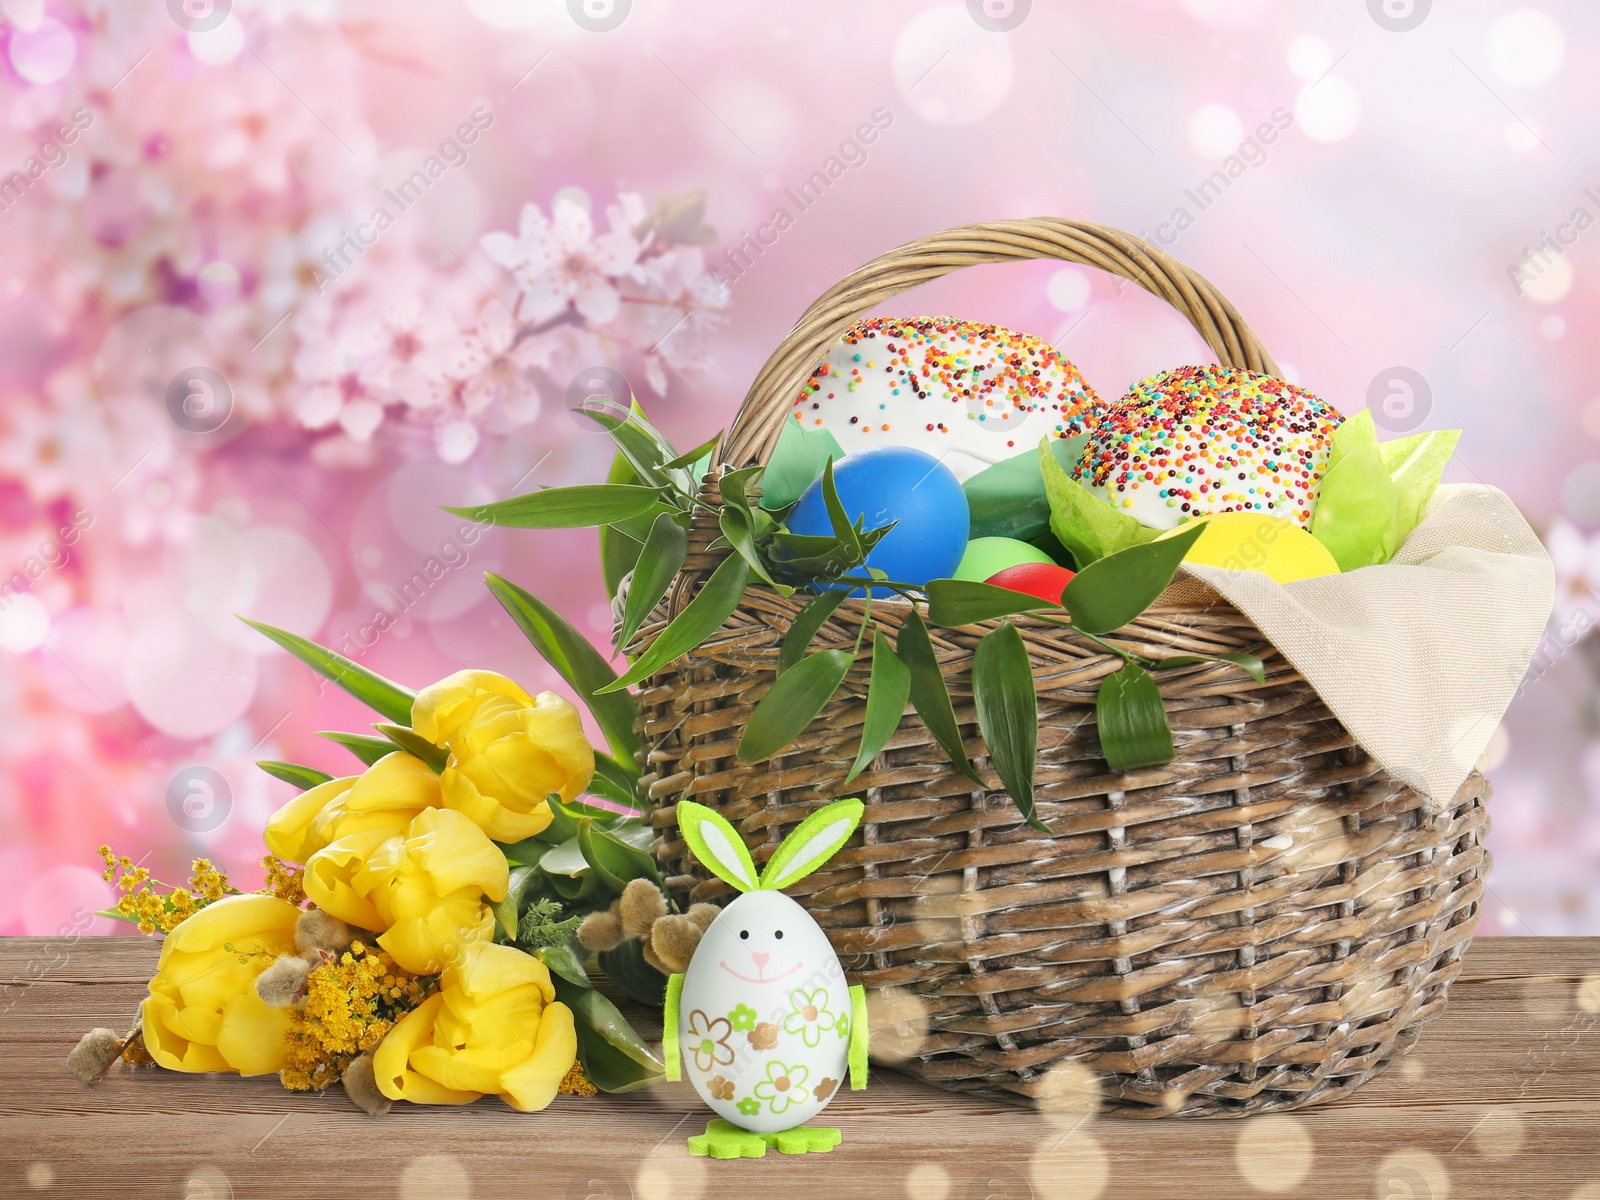 Image of Basket with delicious Easter cakes, dyed eggs and flowers on wooden table outdoors